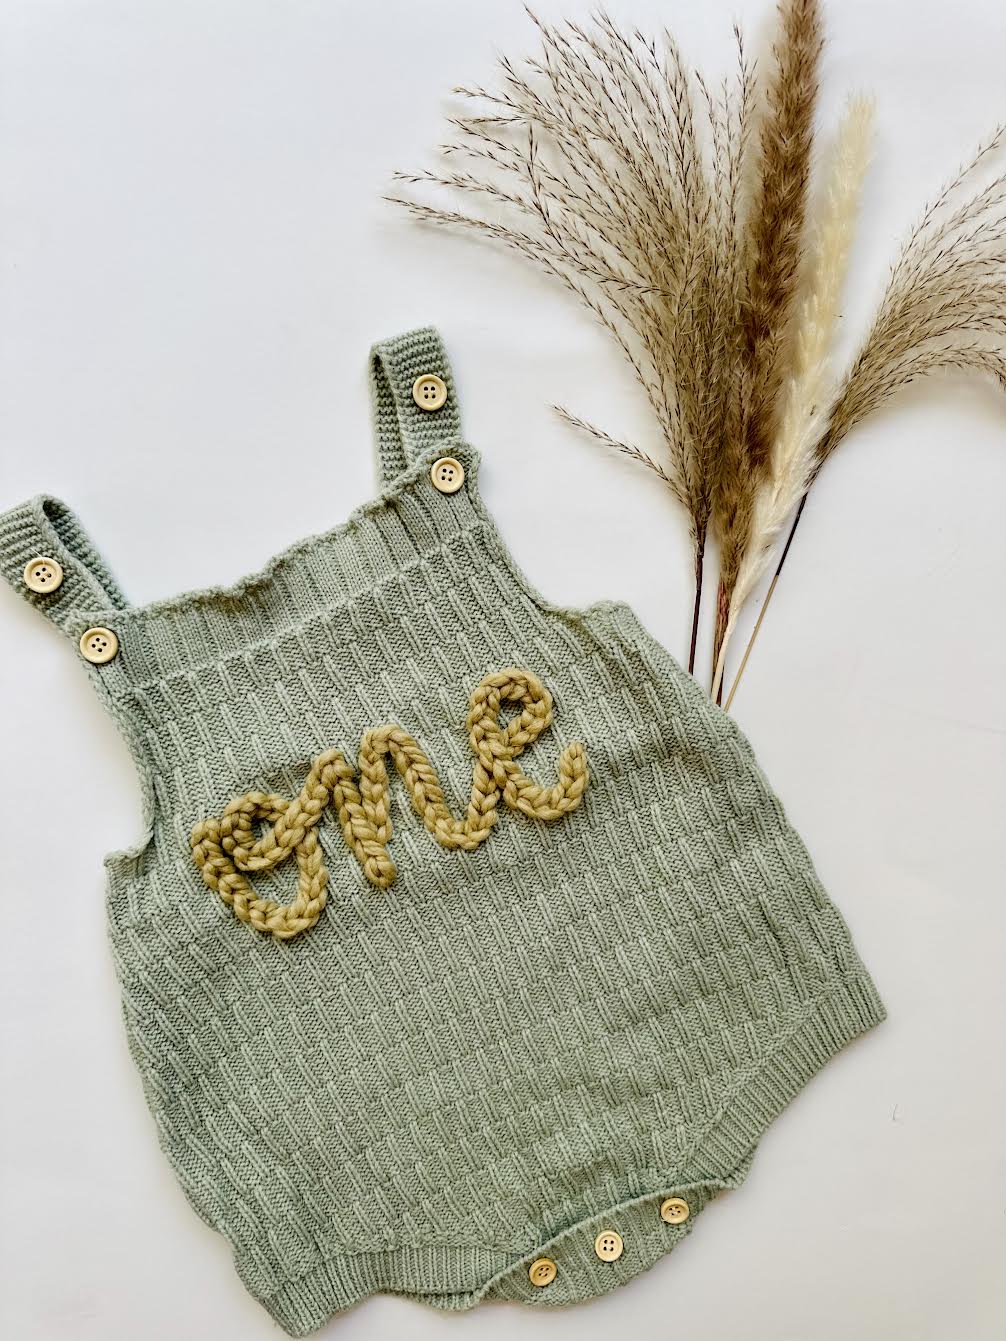 Hand-Embroidered Knitted Baby Romper in Stormy, Rose, Seafoam